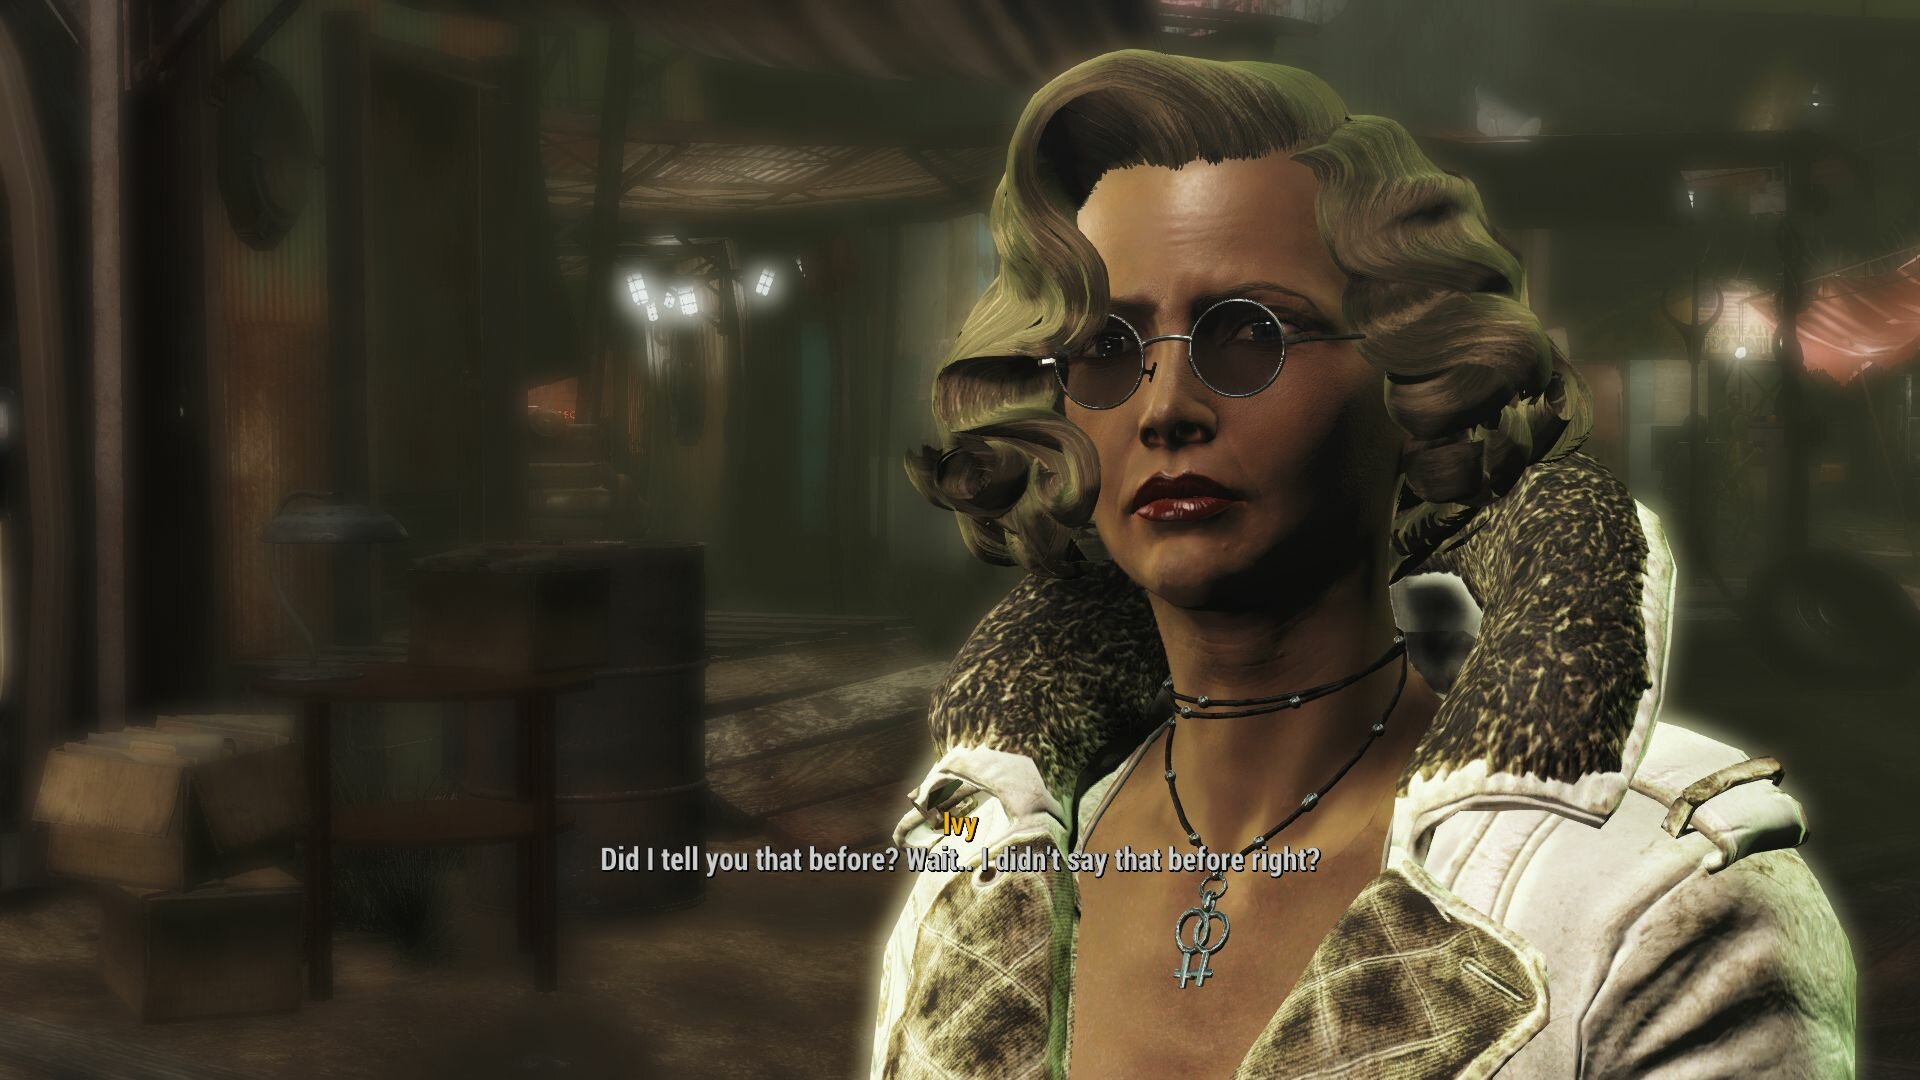 Ivy fallout 4